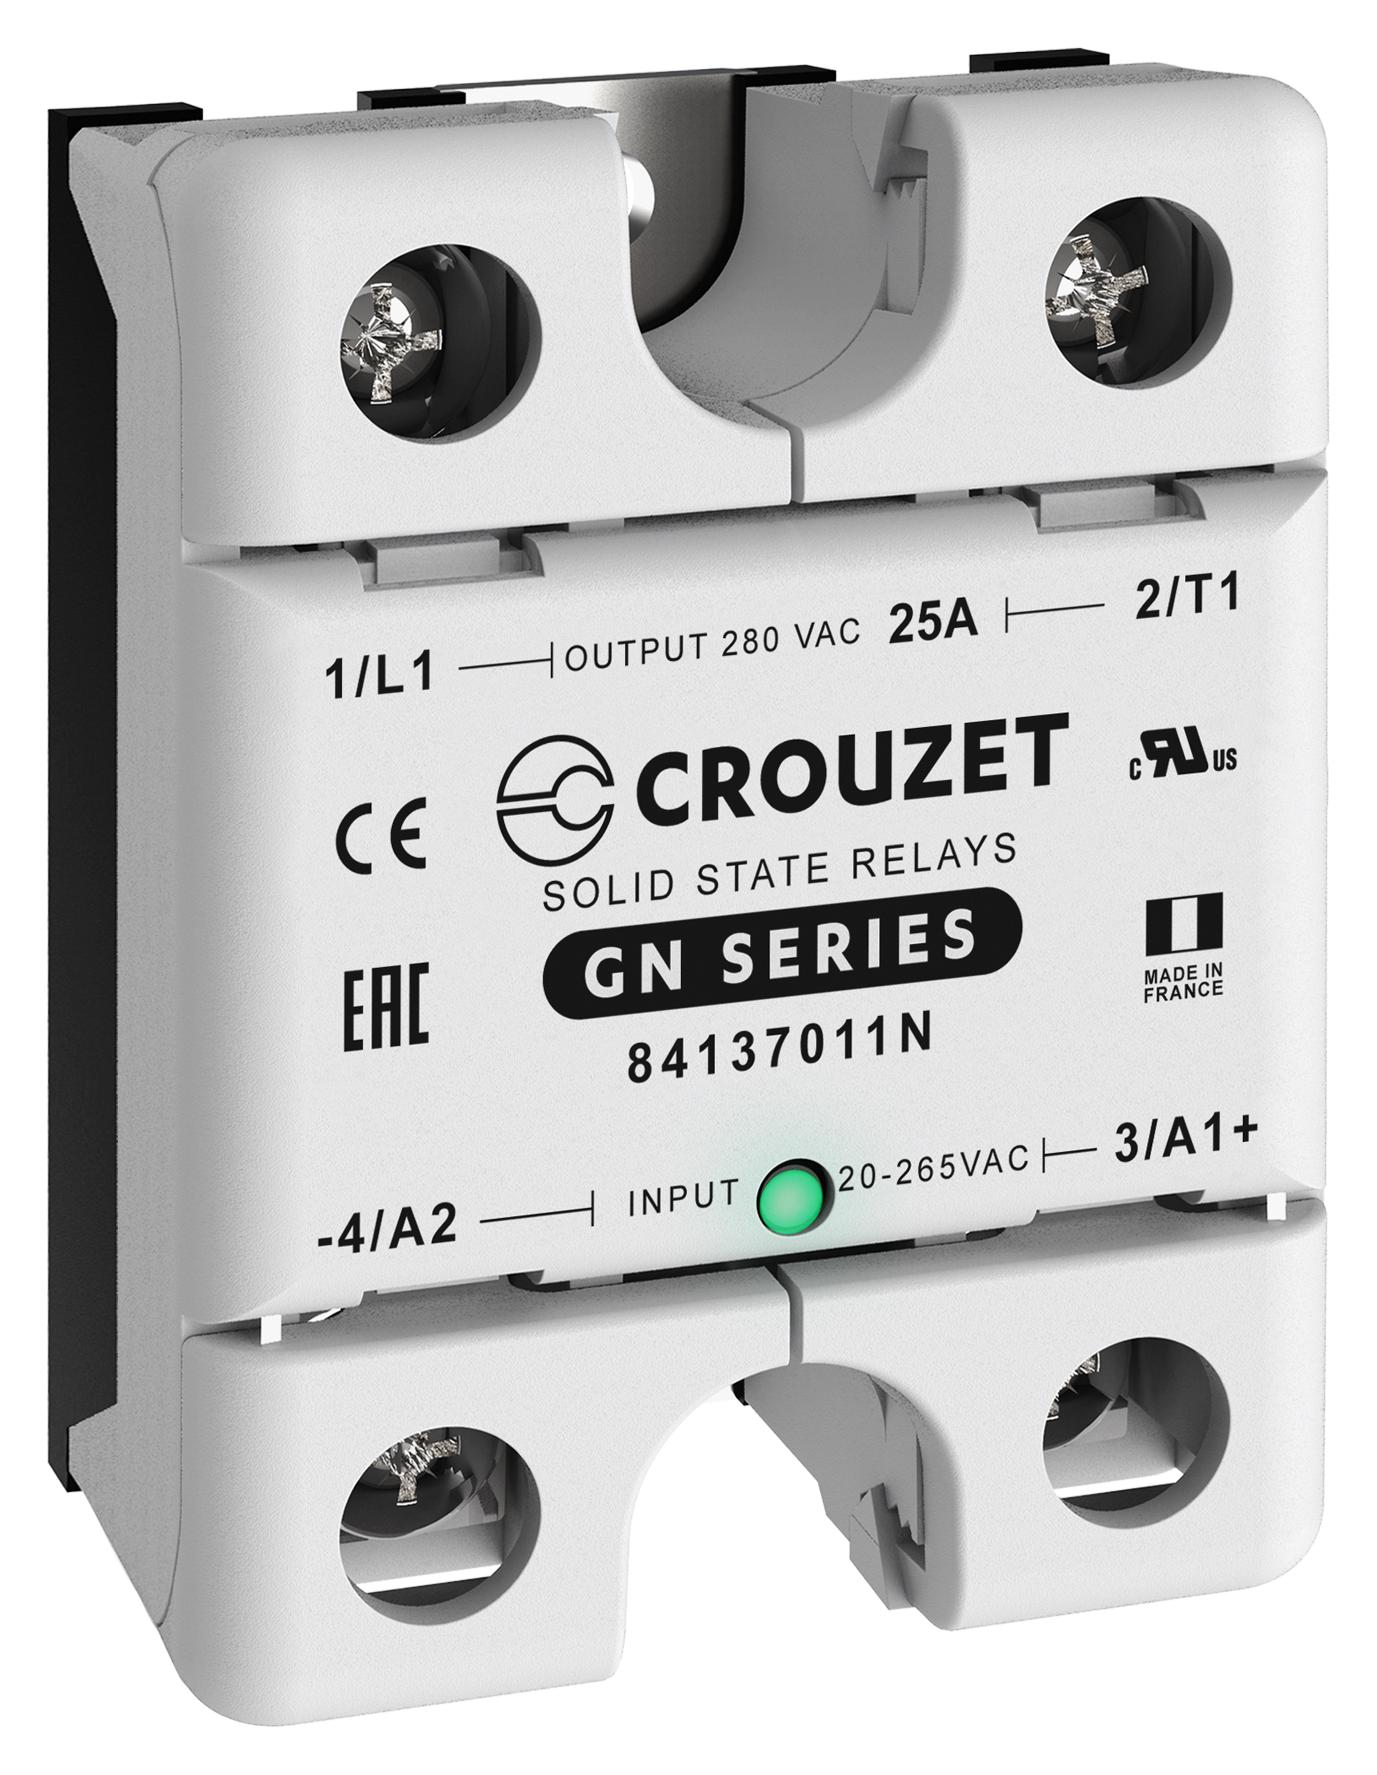 84137011N SOLID STATE RELAY, 25A, 24-280VAC, PANEL CROUZET